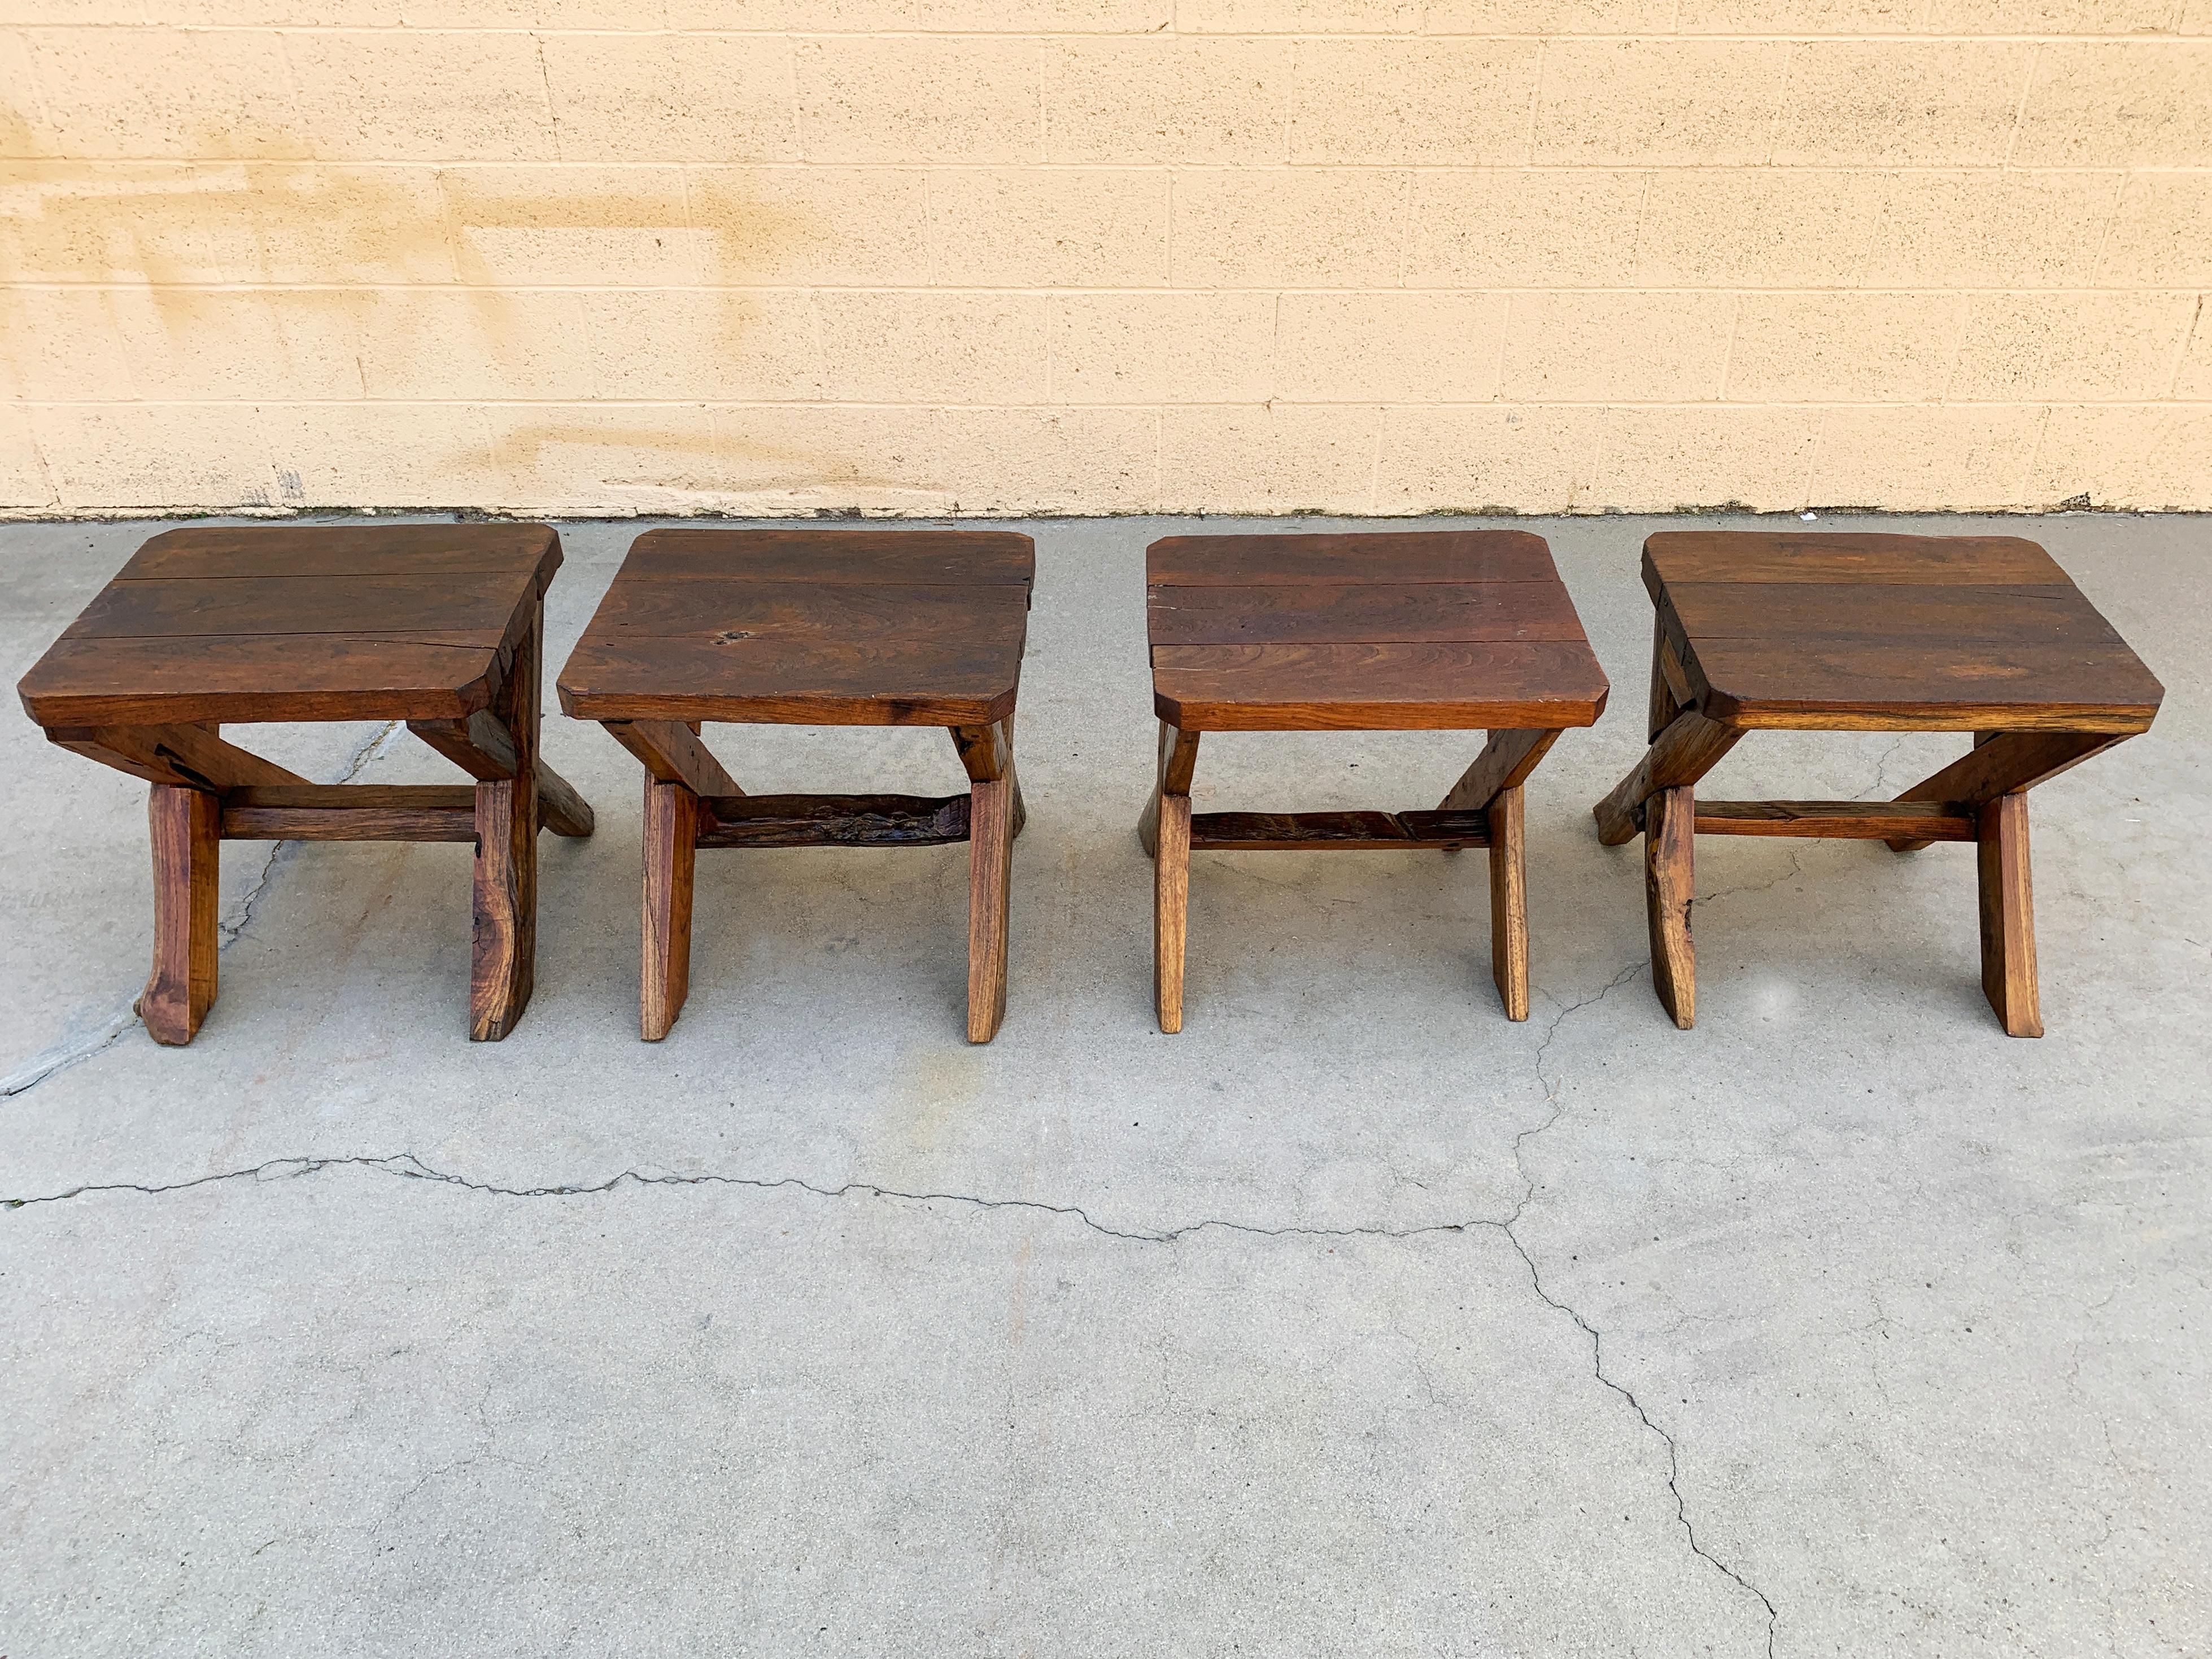 Indonesian Teak Dining Table Set with 4 Bench Seats 3